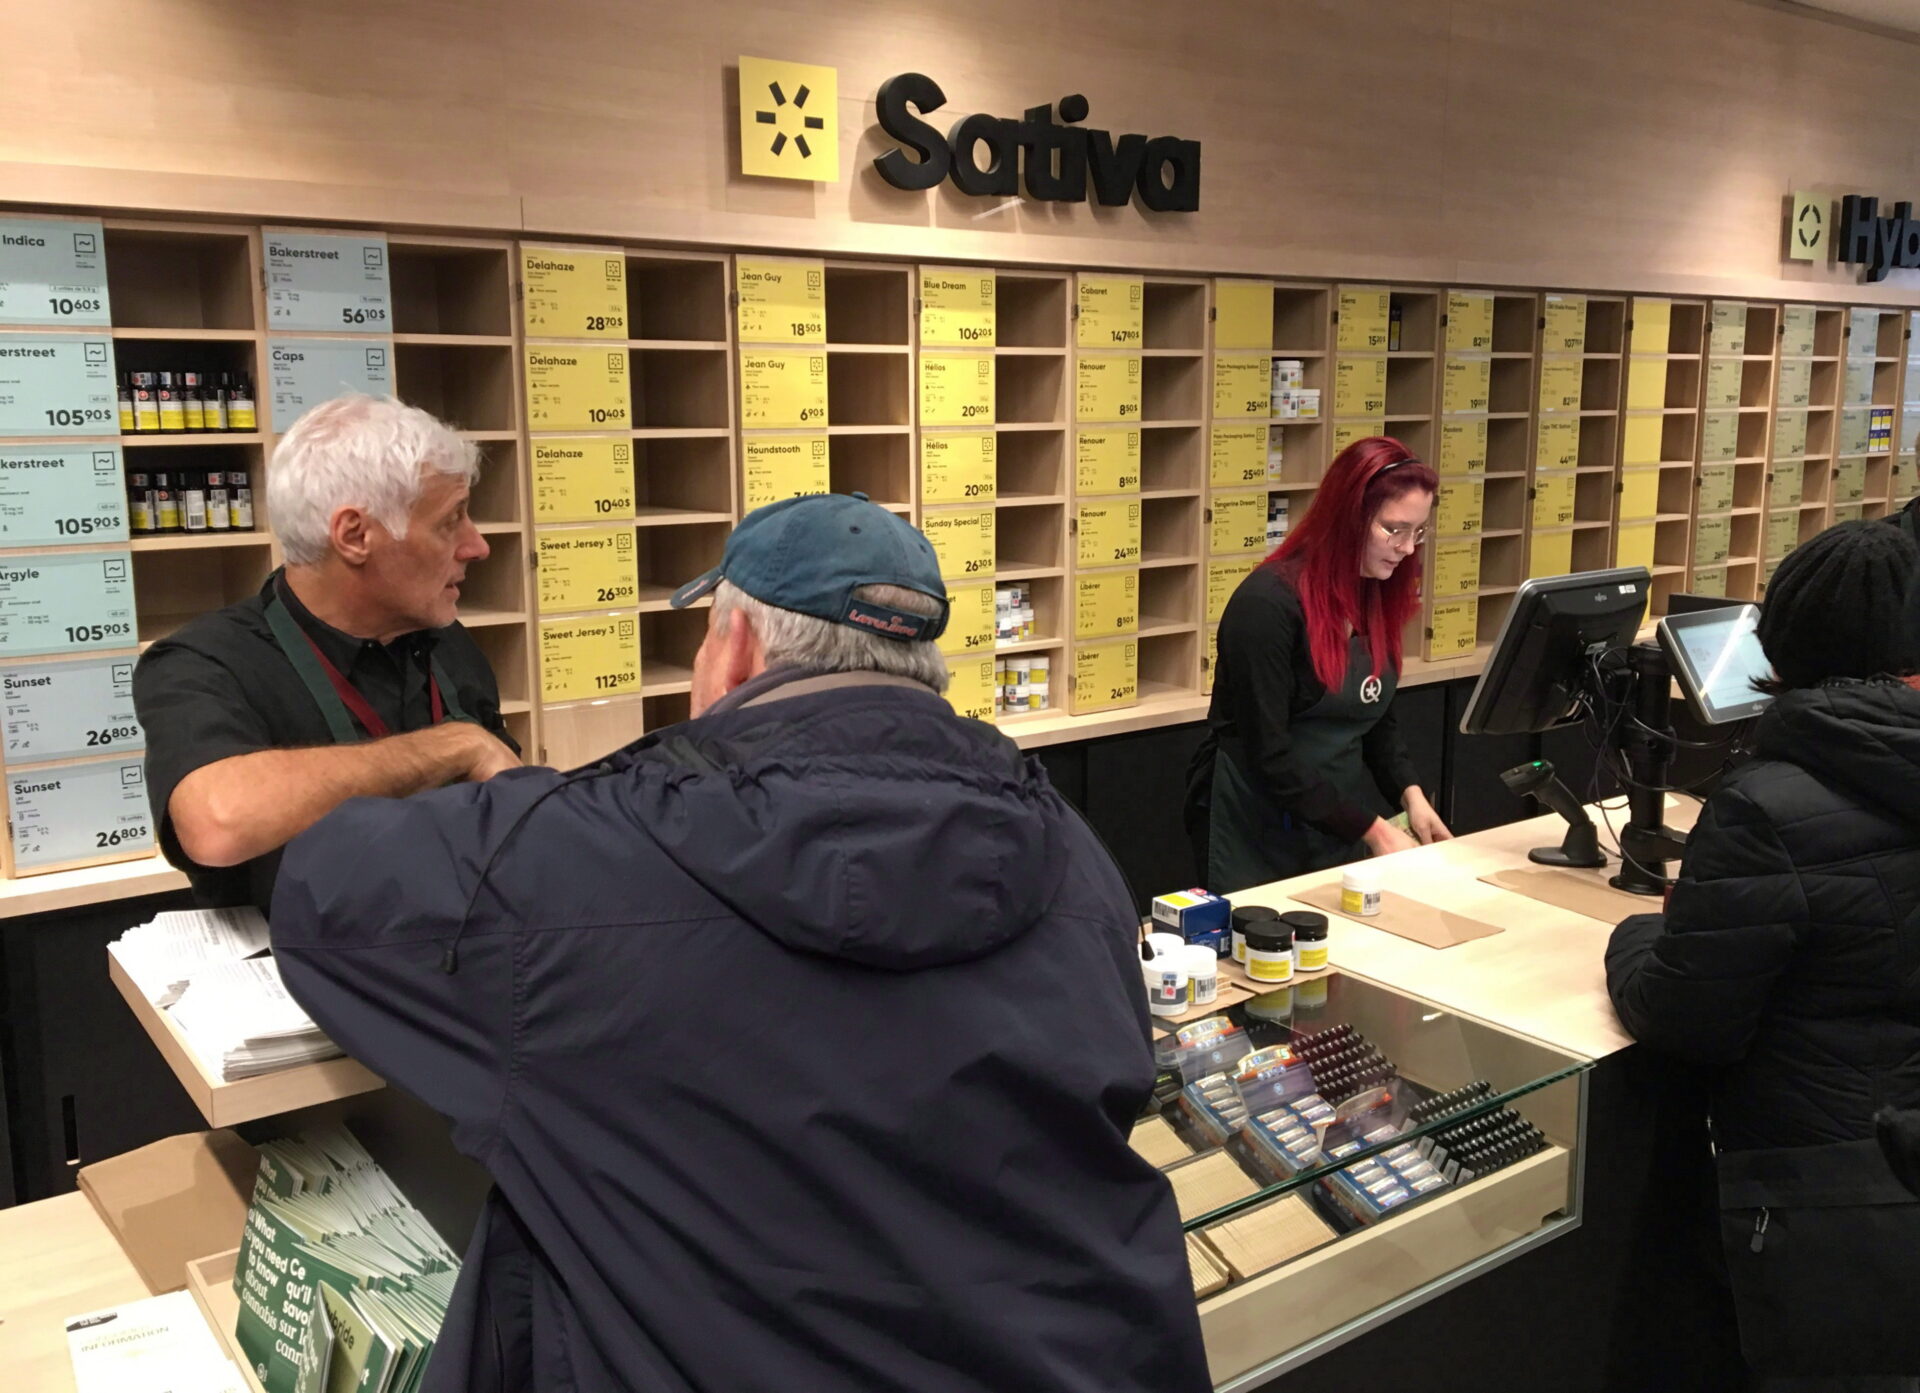 Three customers stand at a long counter where two employees serve them behind computers. A small selection of products is stocked on the counter. The back wall is filled with cubby holes that hold small products. Many of the holes are empty. Above the cubby holes is the word “sativa” in large black letters.